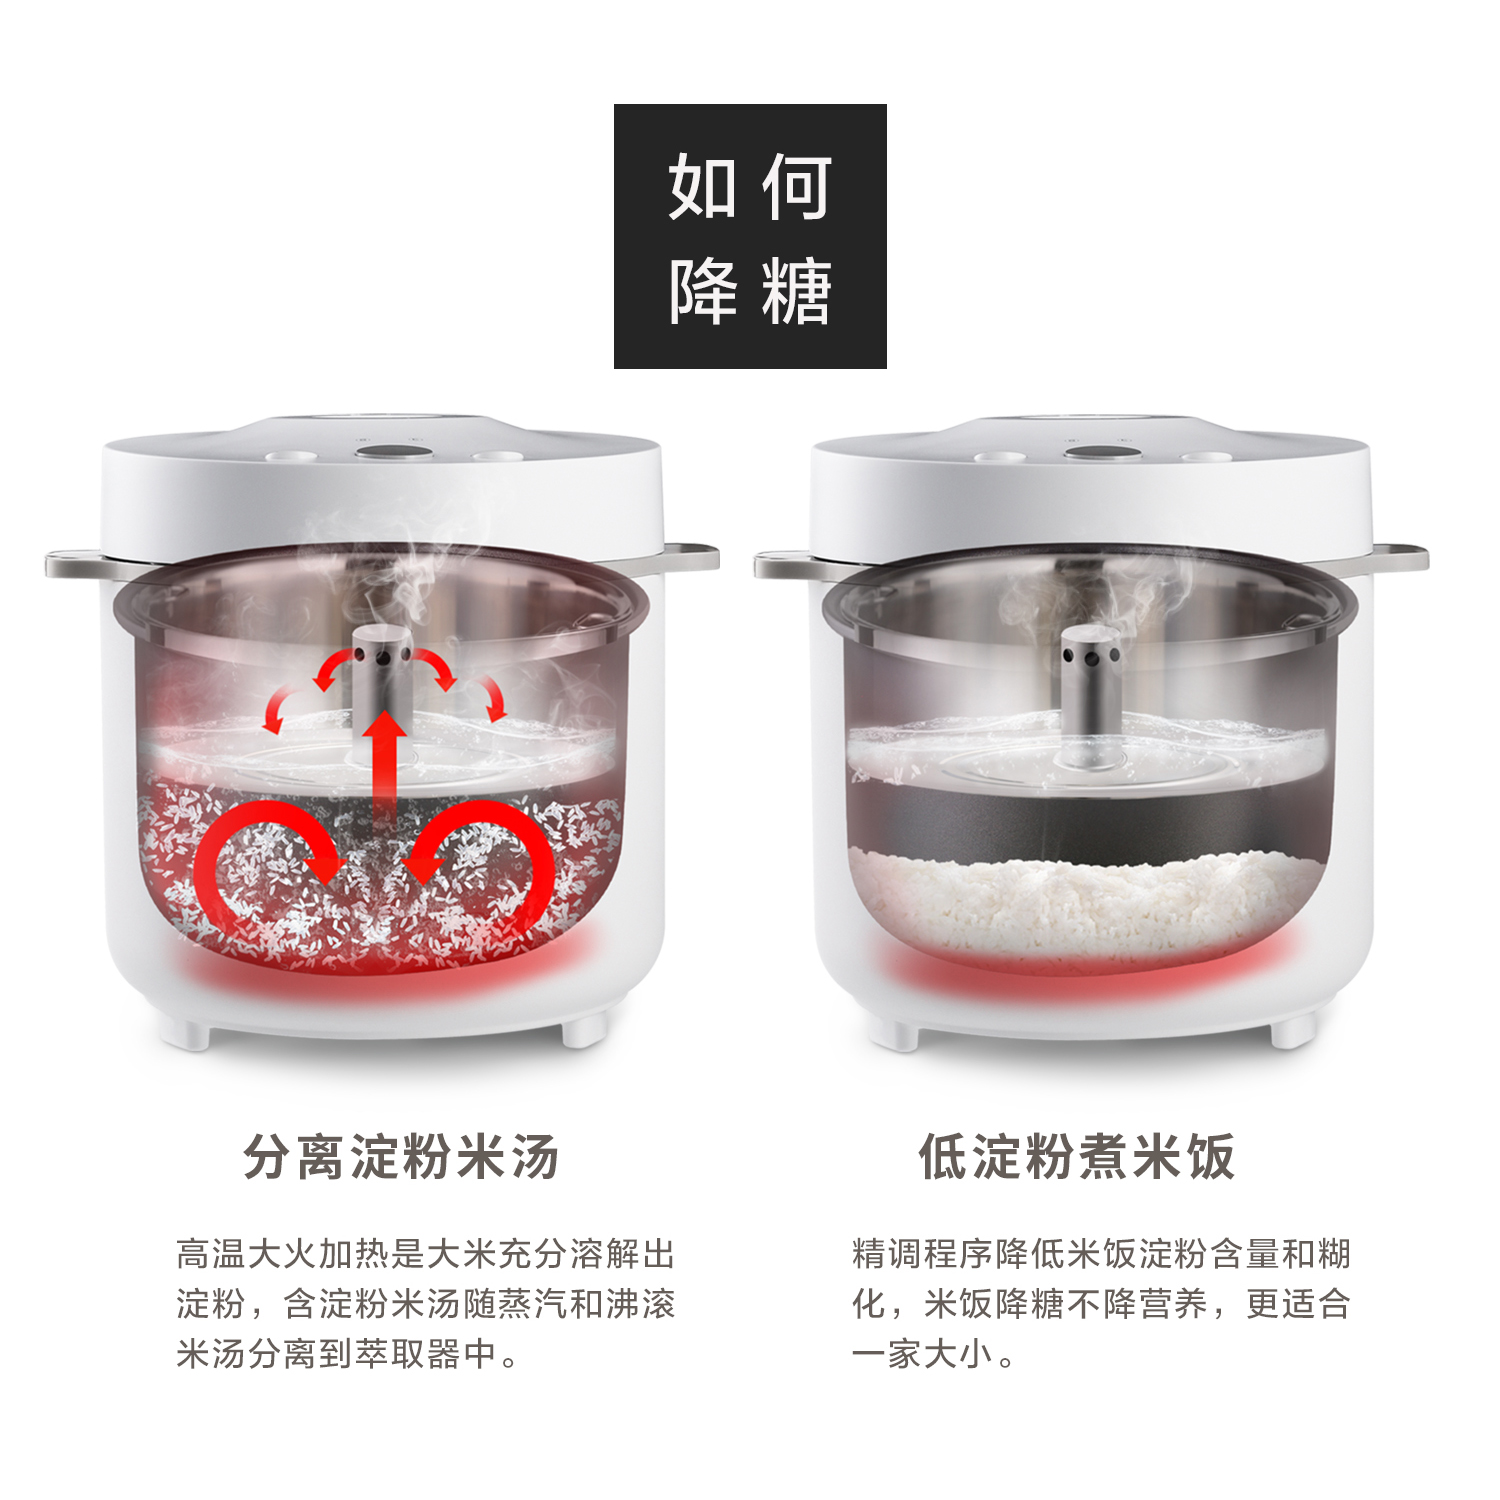 Qoo10 - Brand new 1 litre Buffalo Enco Rice Cooker model no. KW63 one year  war : Small Appliances